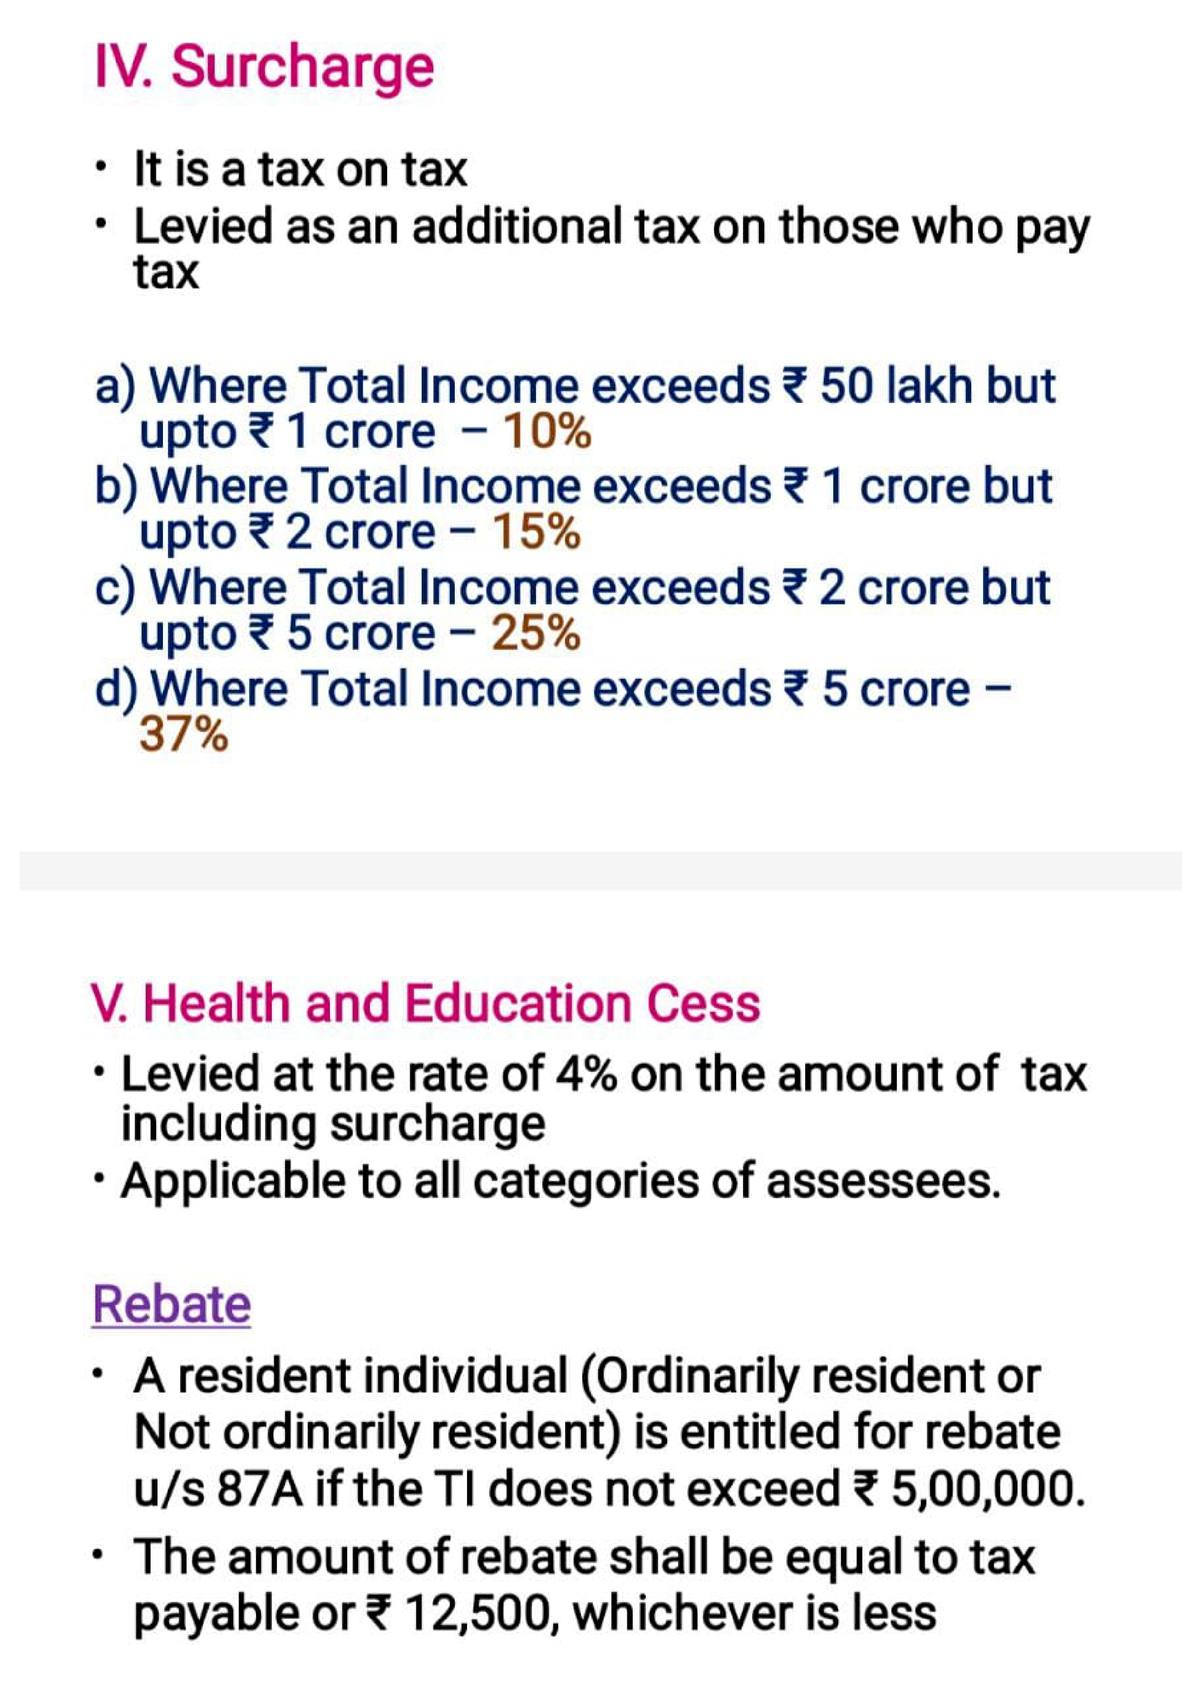 essay on income tax in india